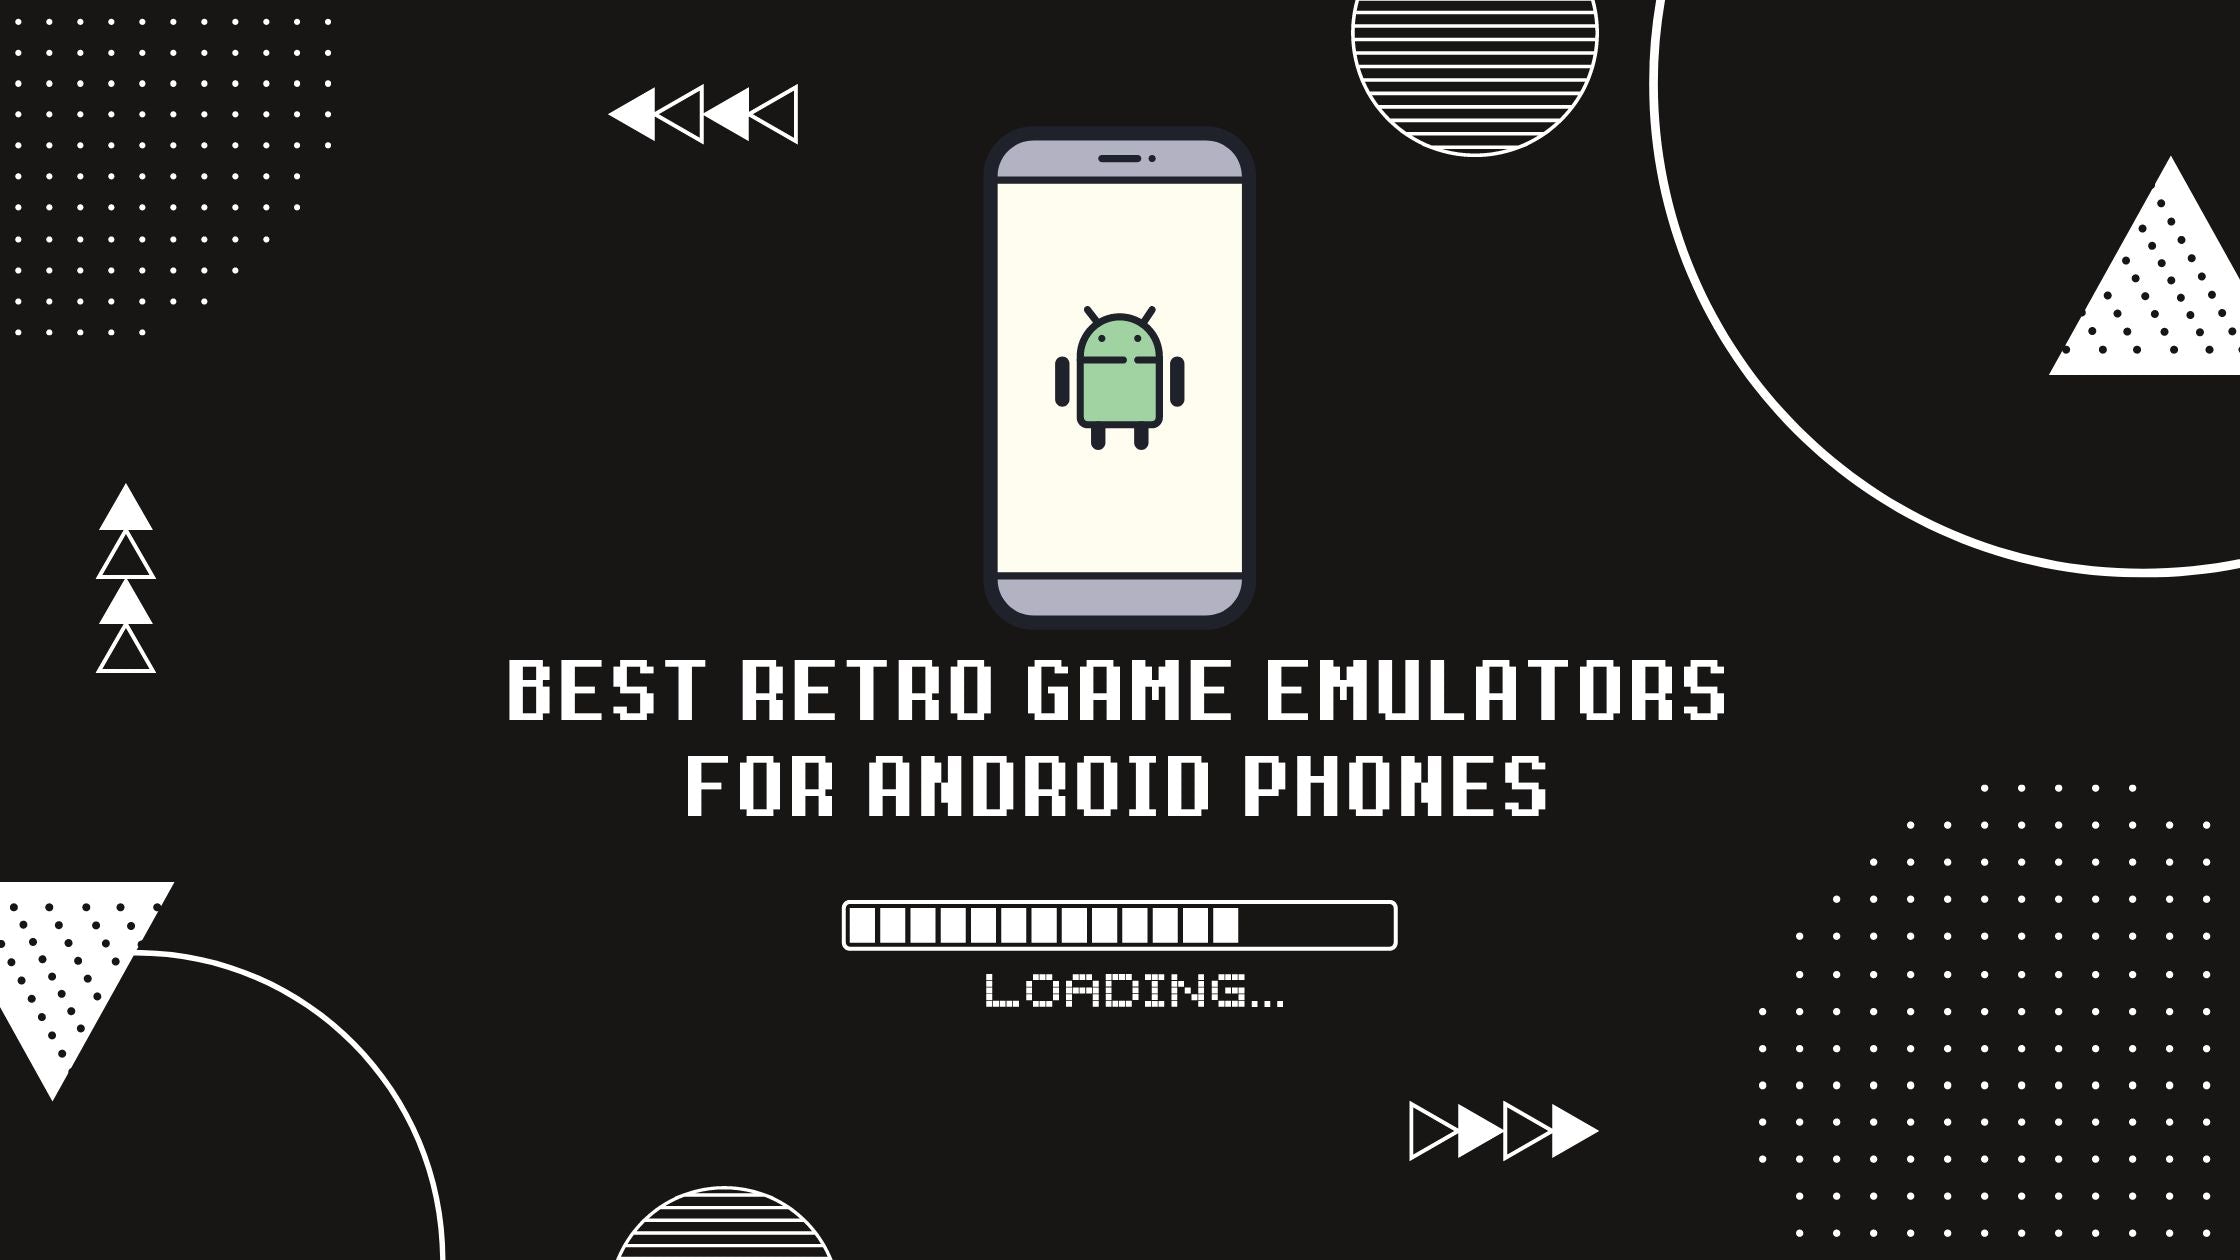 The Ultimate Guide to the Best Retro Game Emulators for Android Phones